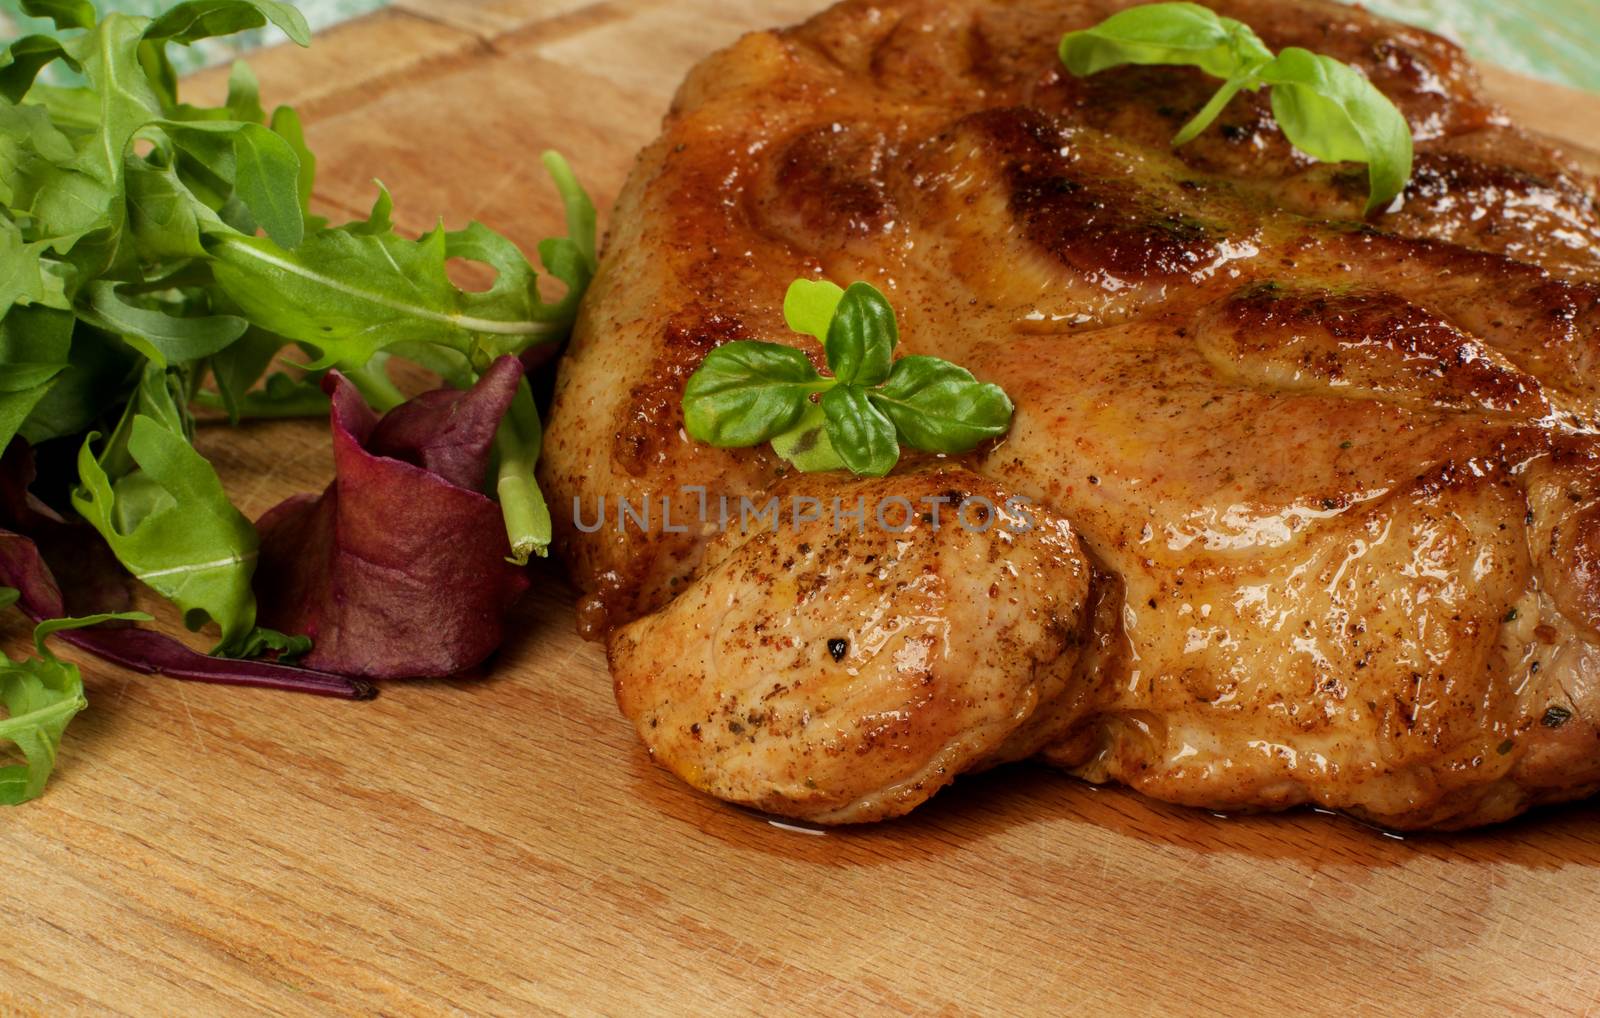 Delicious Juicy Roasted Pork Neck with Fresh Arugula, Mangold and Basil closeup on Wooden Cutting Board